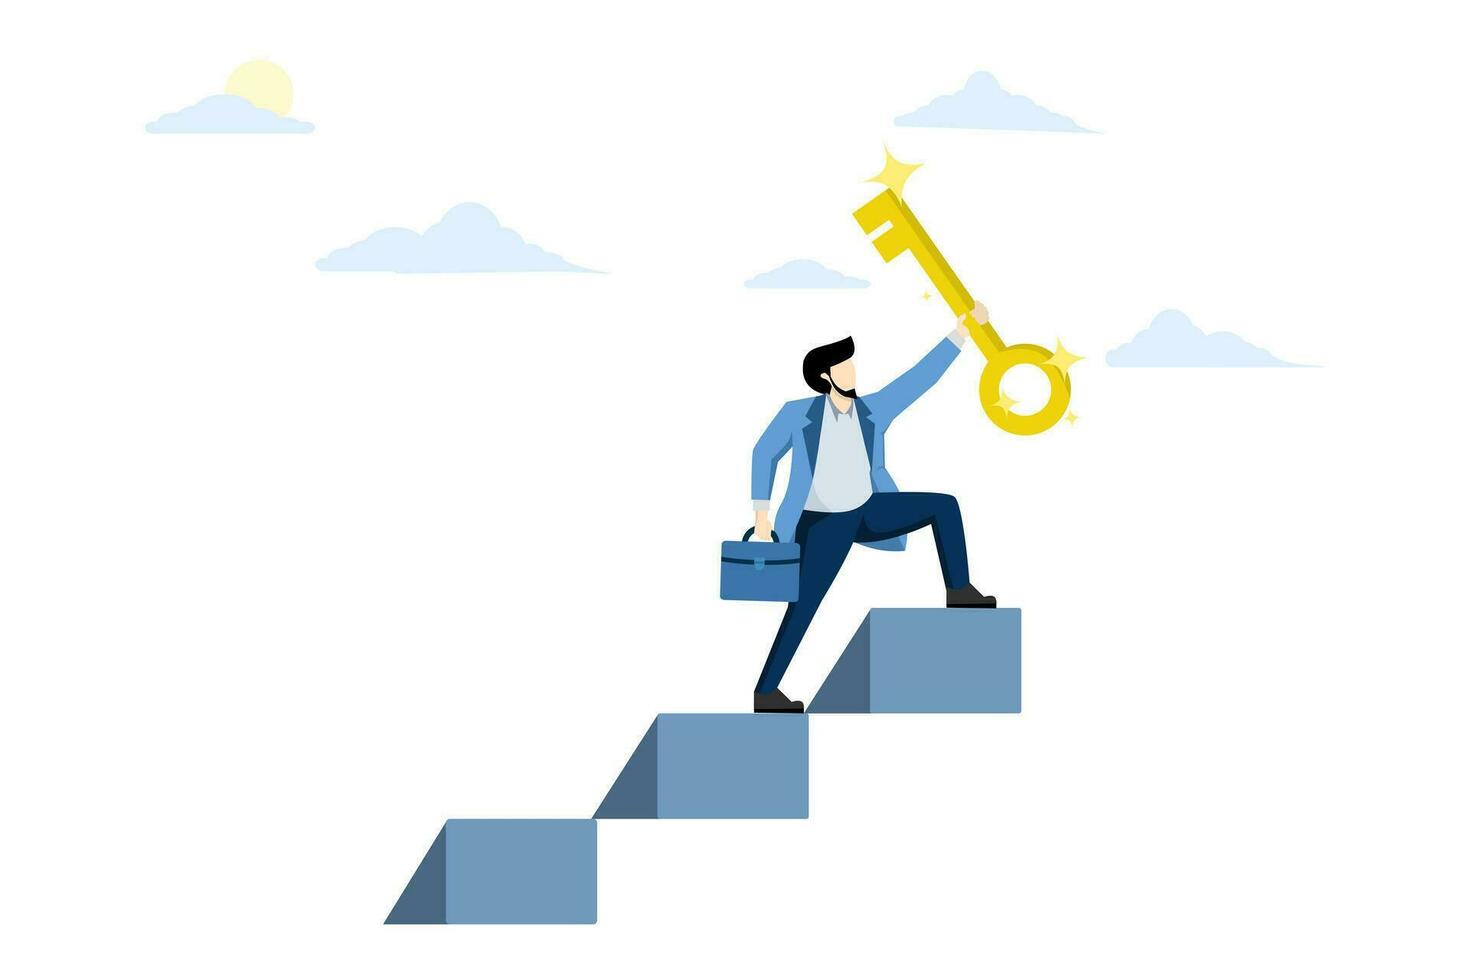 Business success key concept, ladder to find secret key or reach career target, victorious businessman climbing ladder lifting golden key of success to sky. flat vector illustration on background.